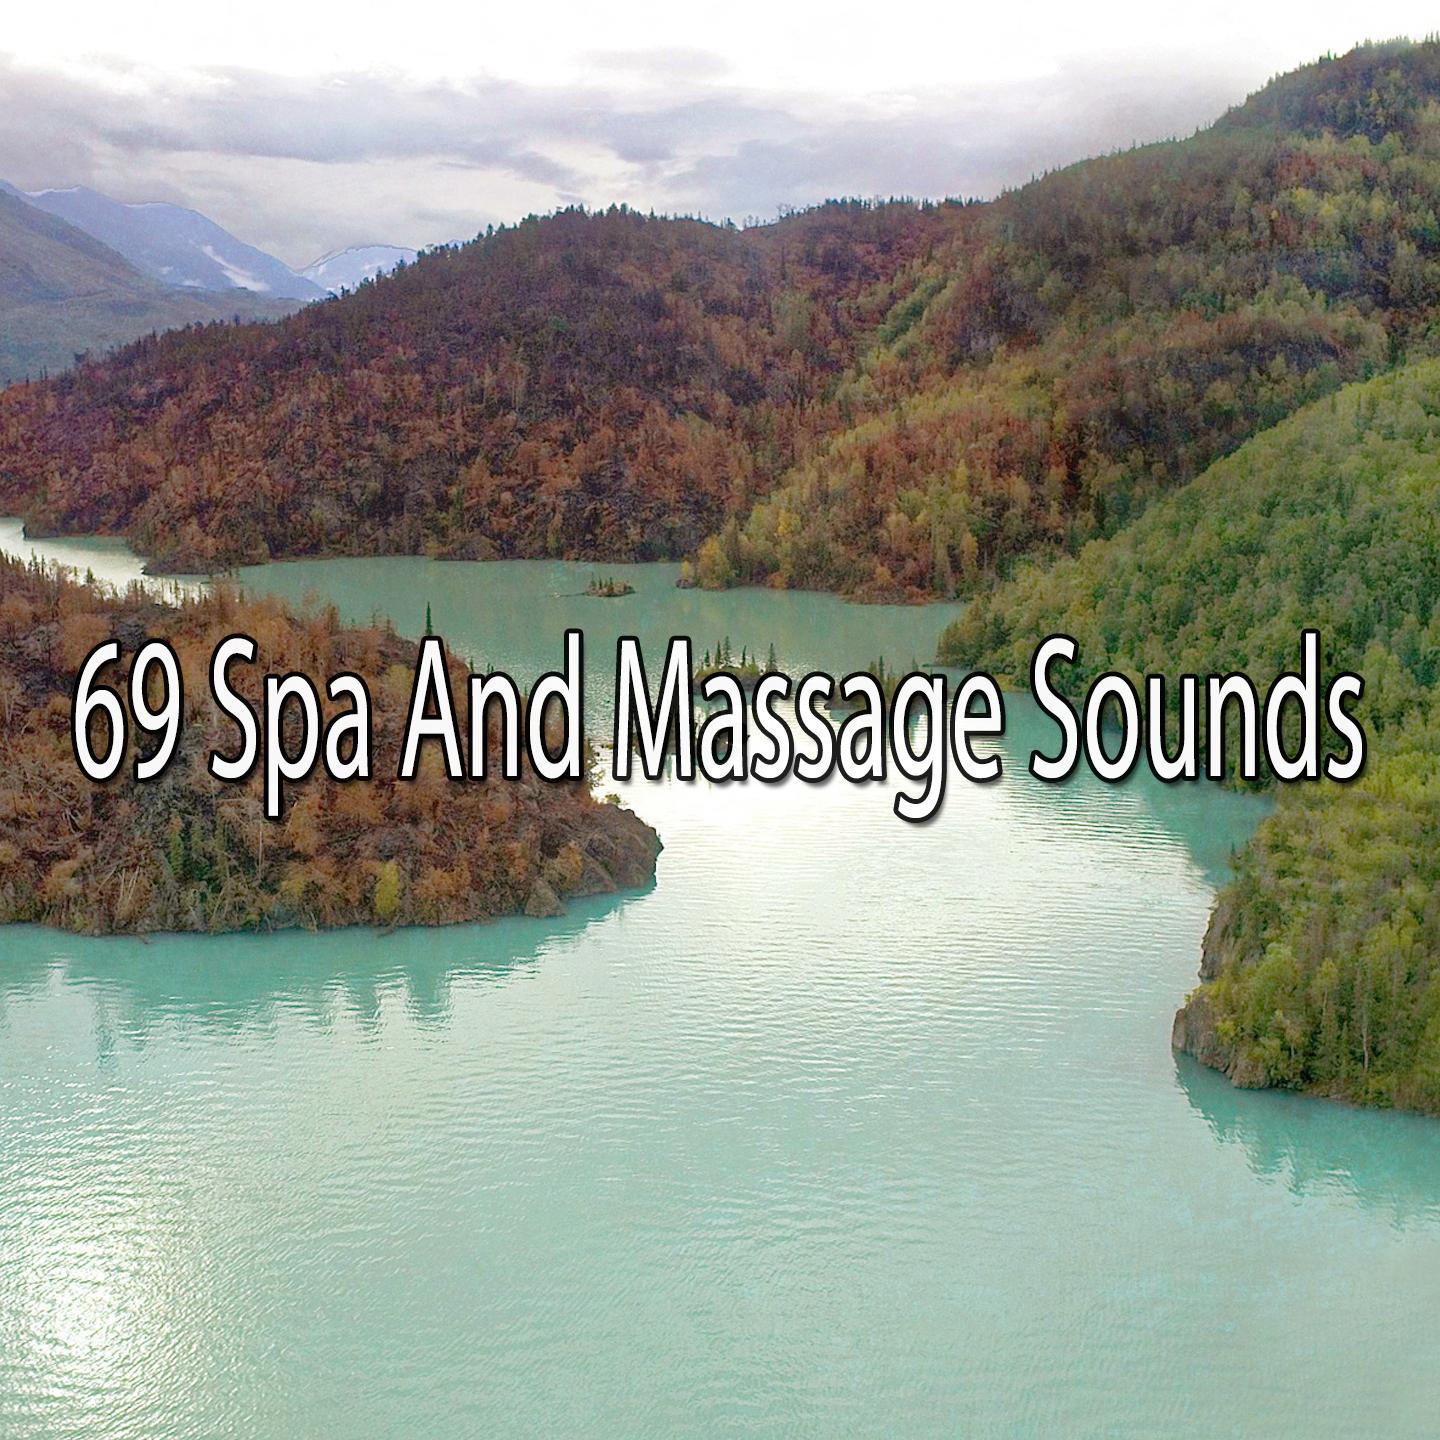 69 Spa and Massage Sounds